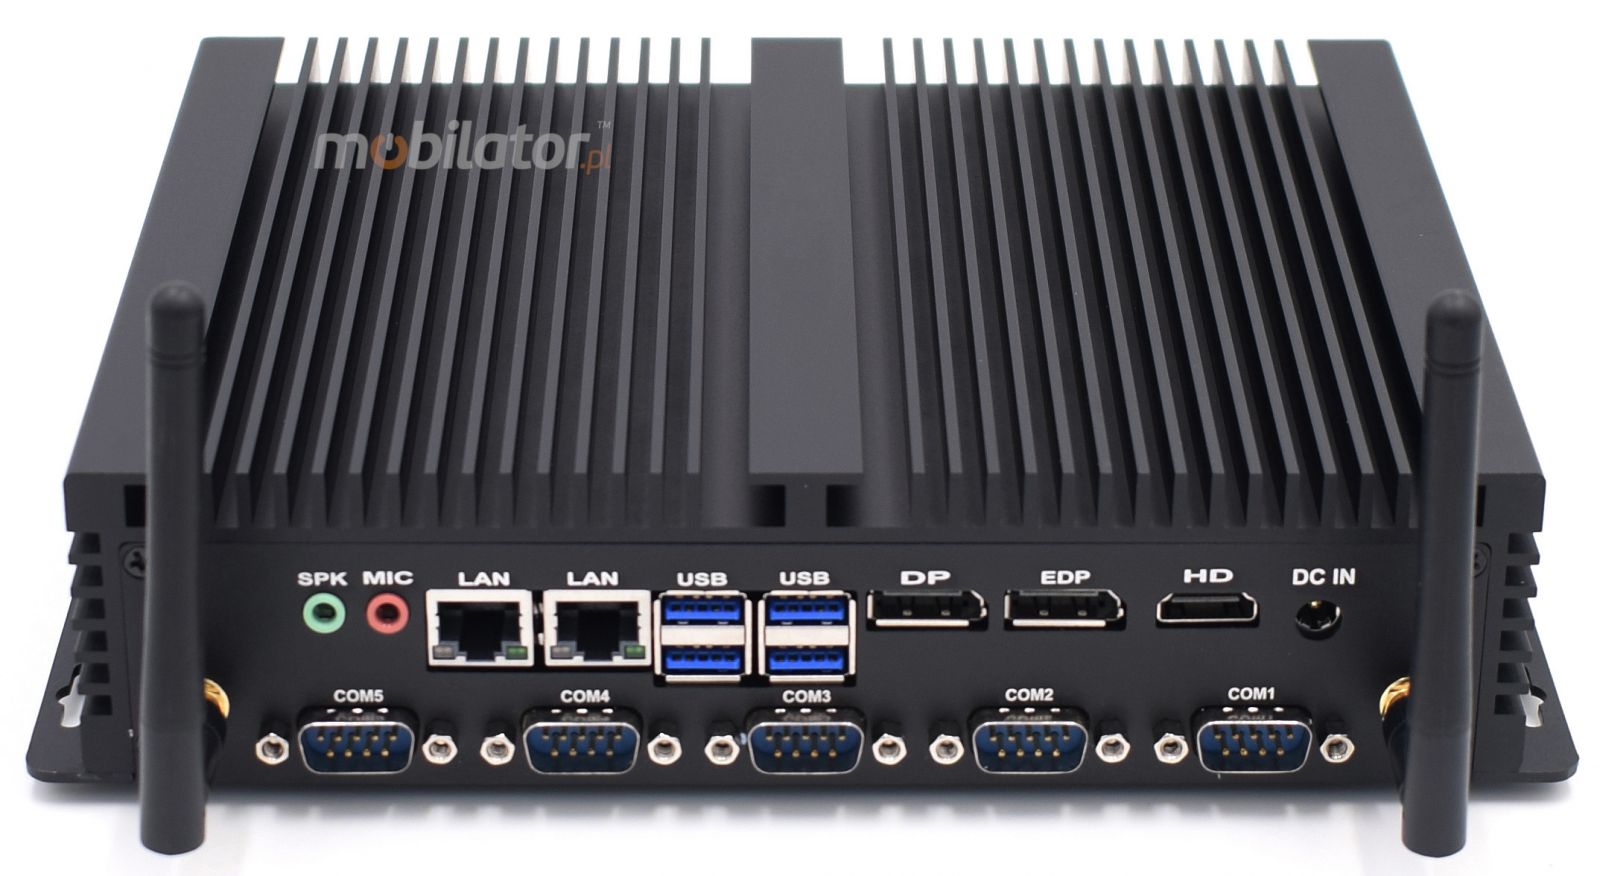  HyBOX H4 Intel i7 small reliable fast and efficient mini pc